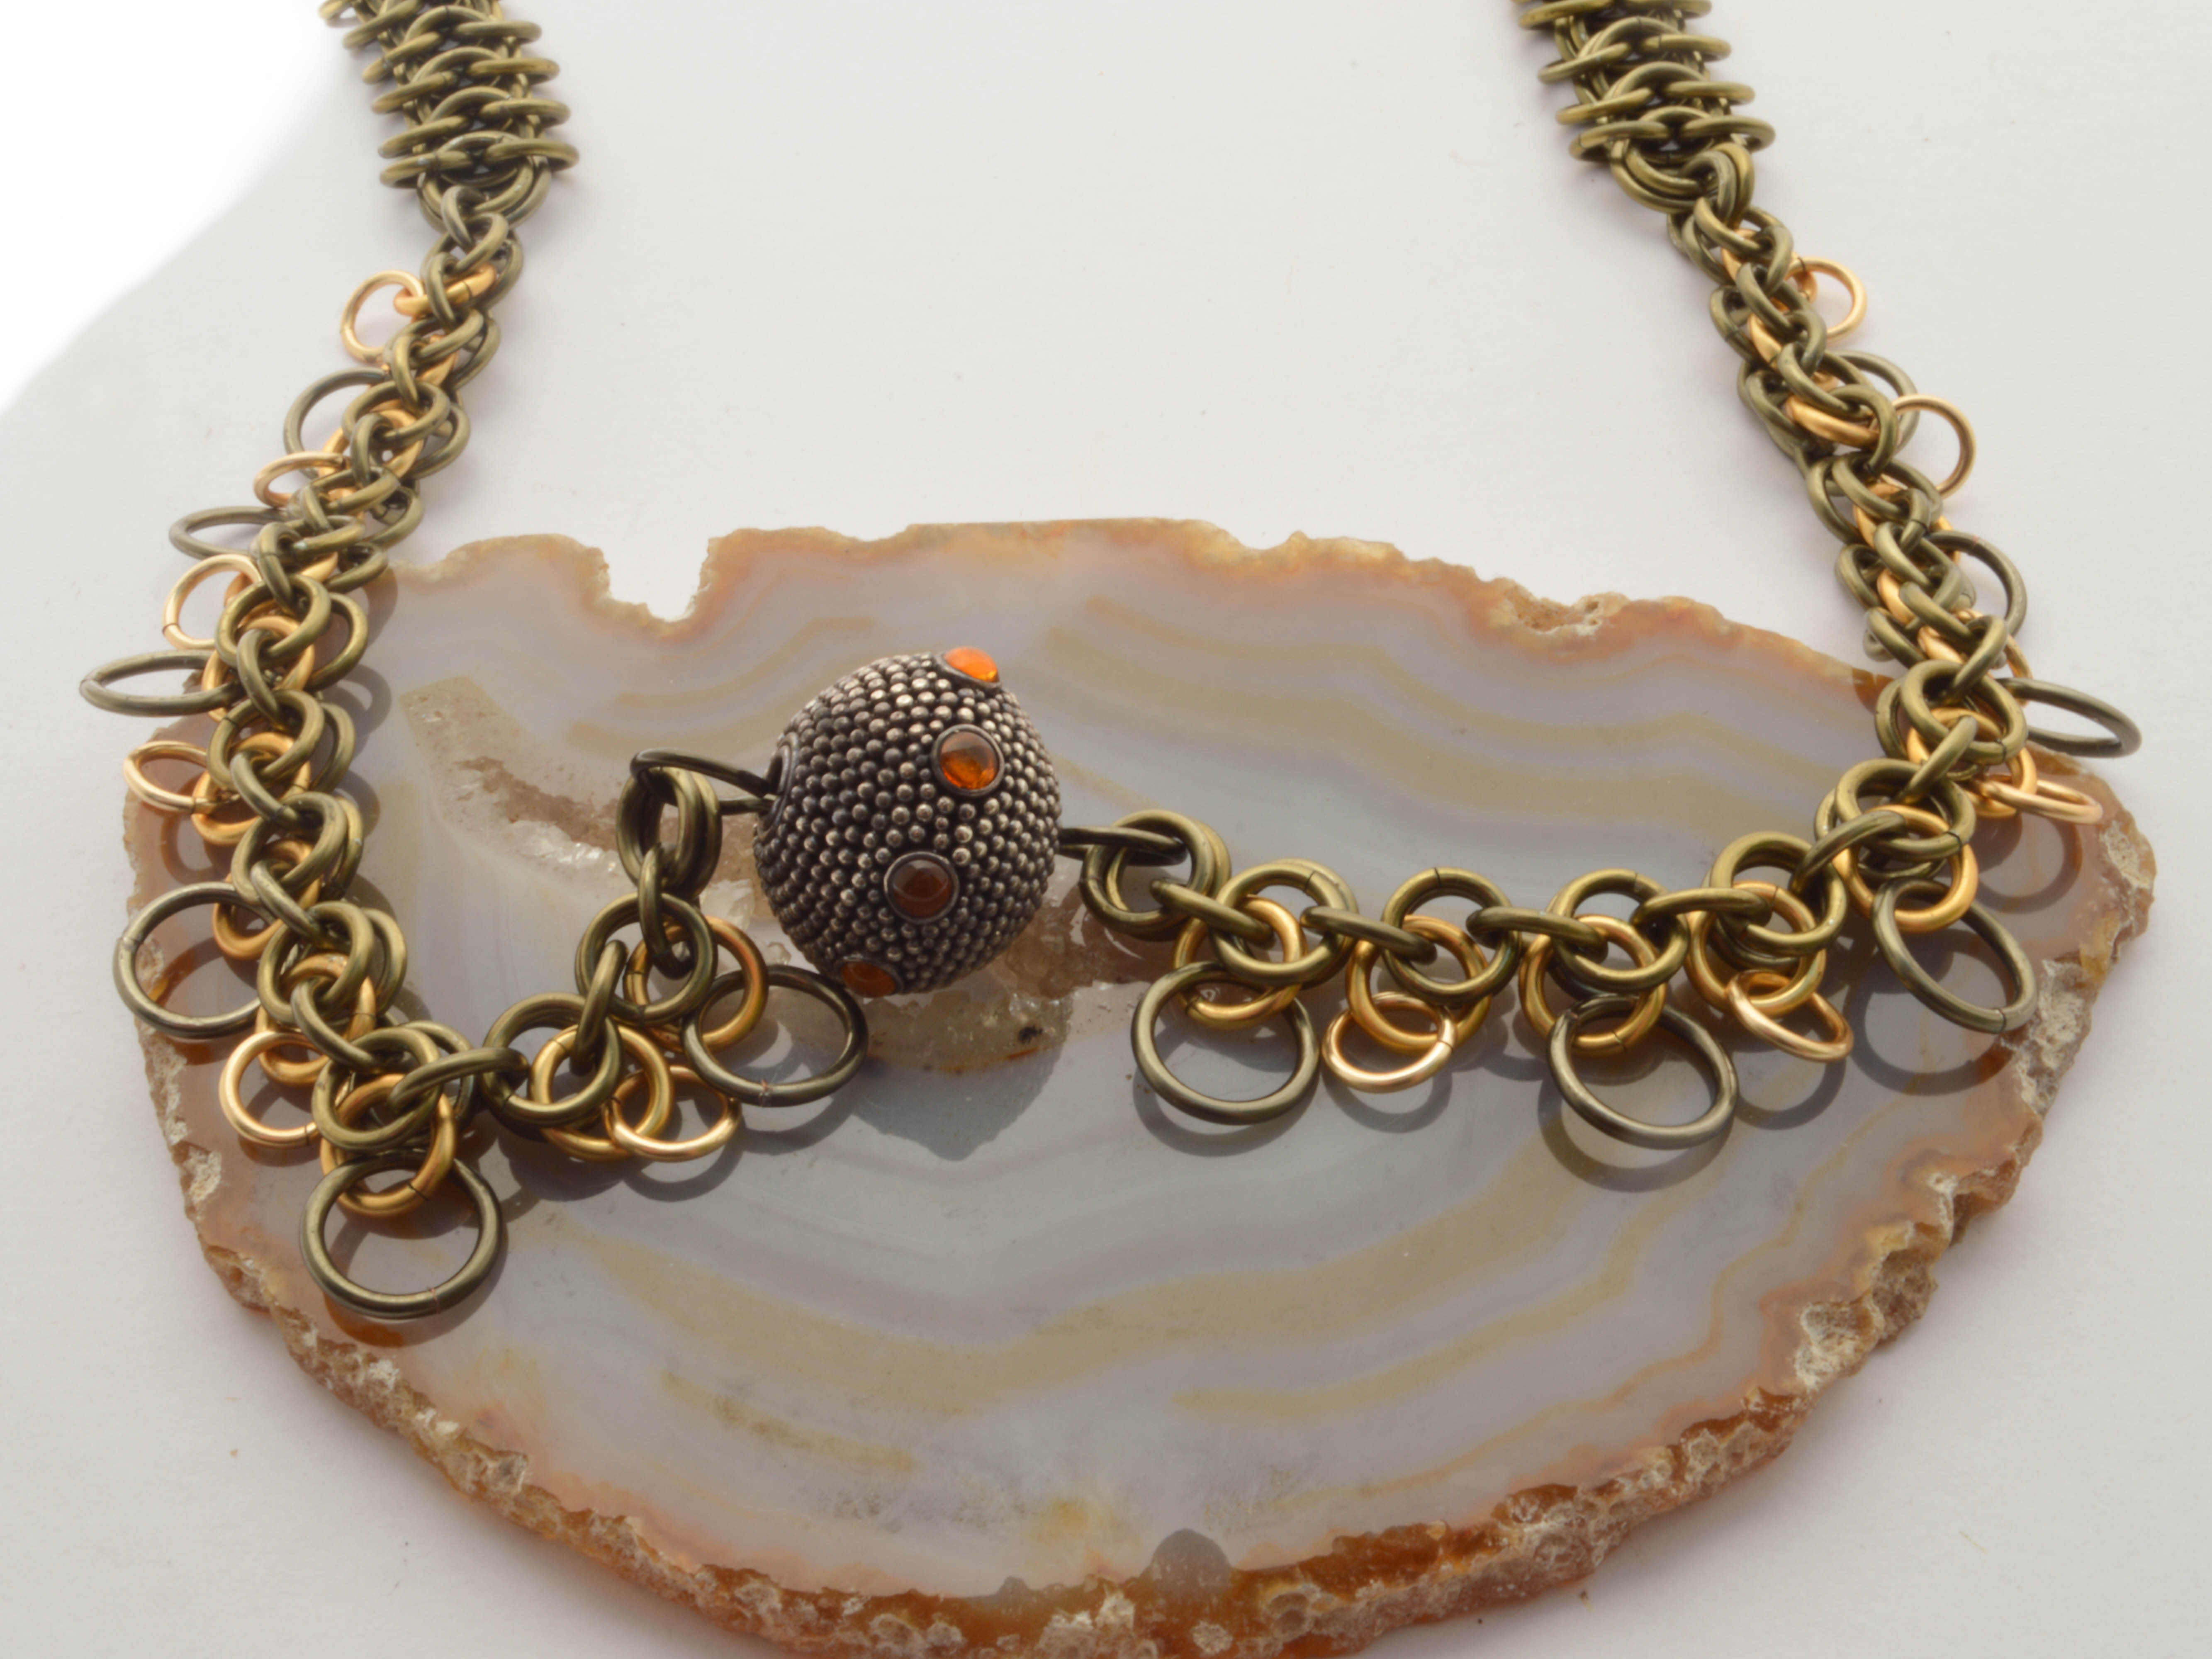 Bronze and Nugold orchid weave necklace with silver textured bead